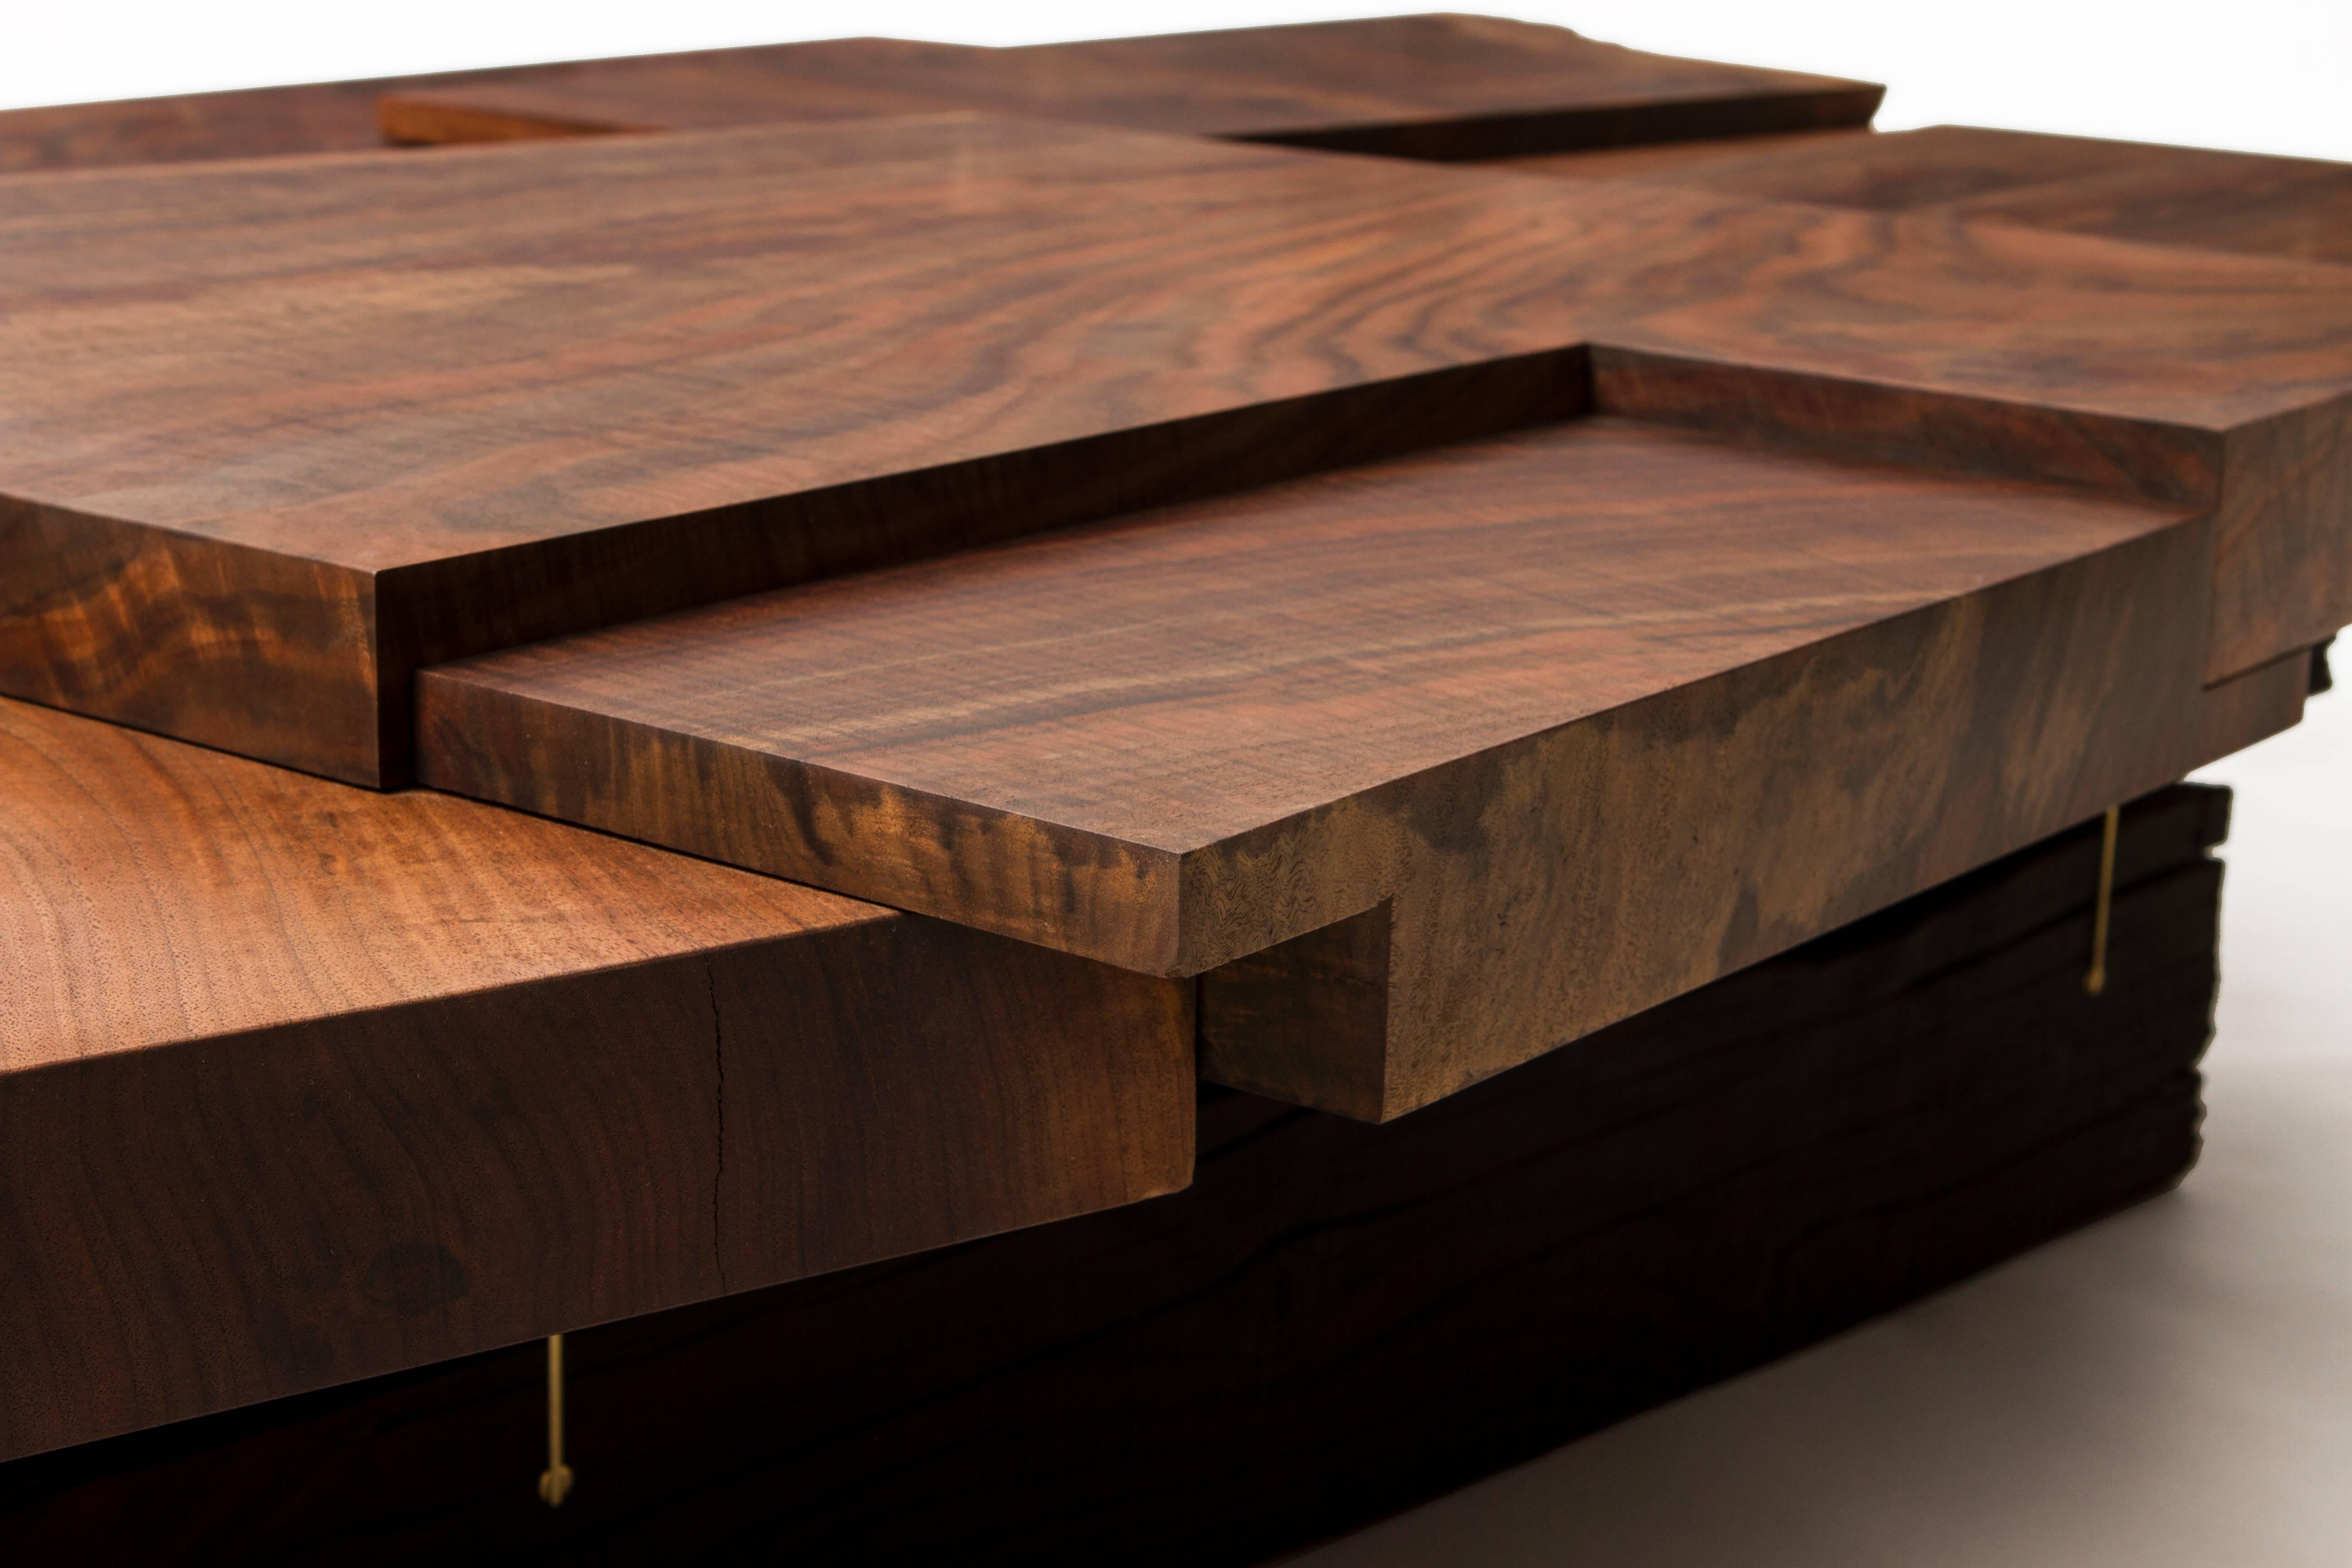 Handcrafted by Taylor Donsker in Northern California, this piece is inspired by strike slip earthquakes and wood movement. The Strike/Slip coffee table features a multi-layered, 'ruptured' surface with two independently supported halves. This allows